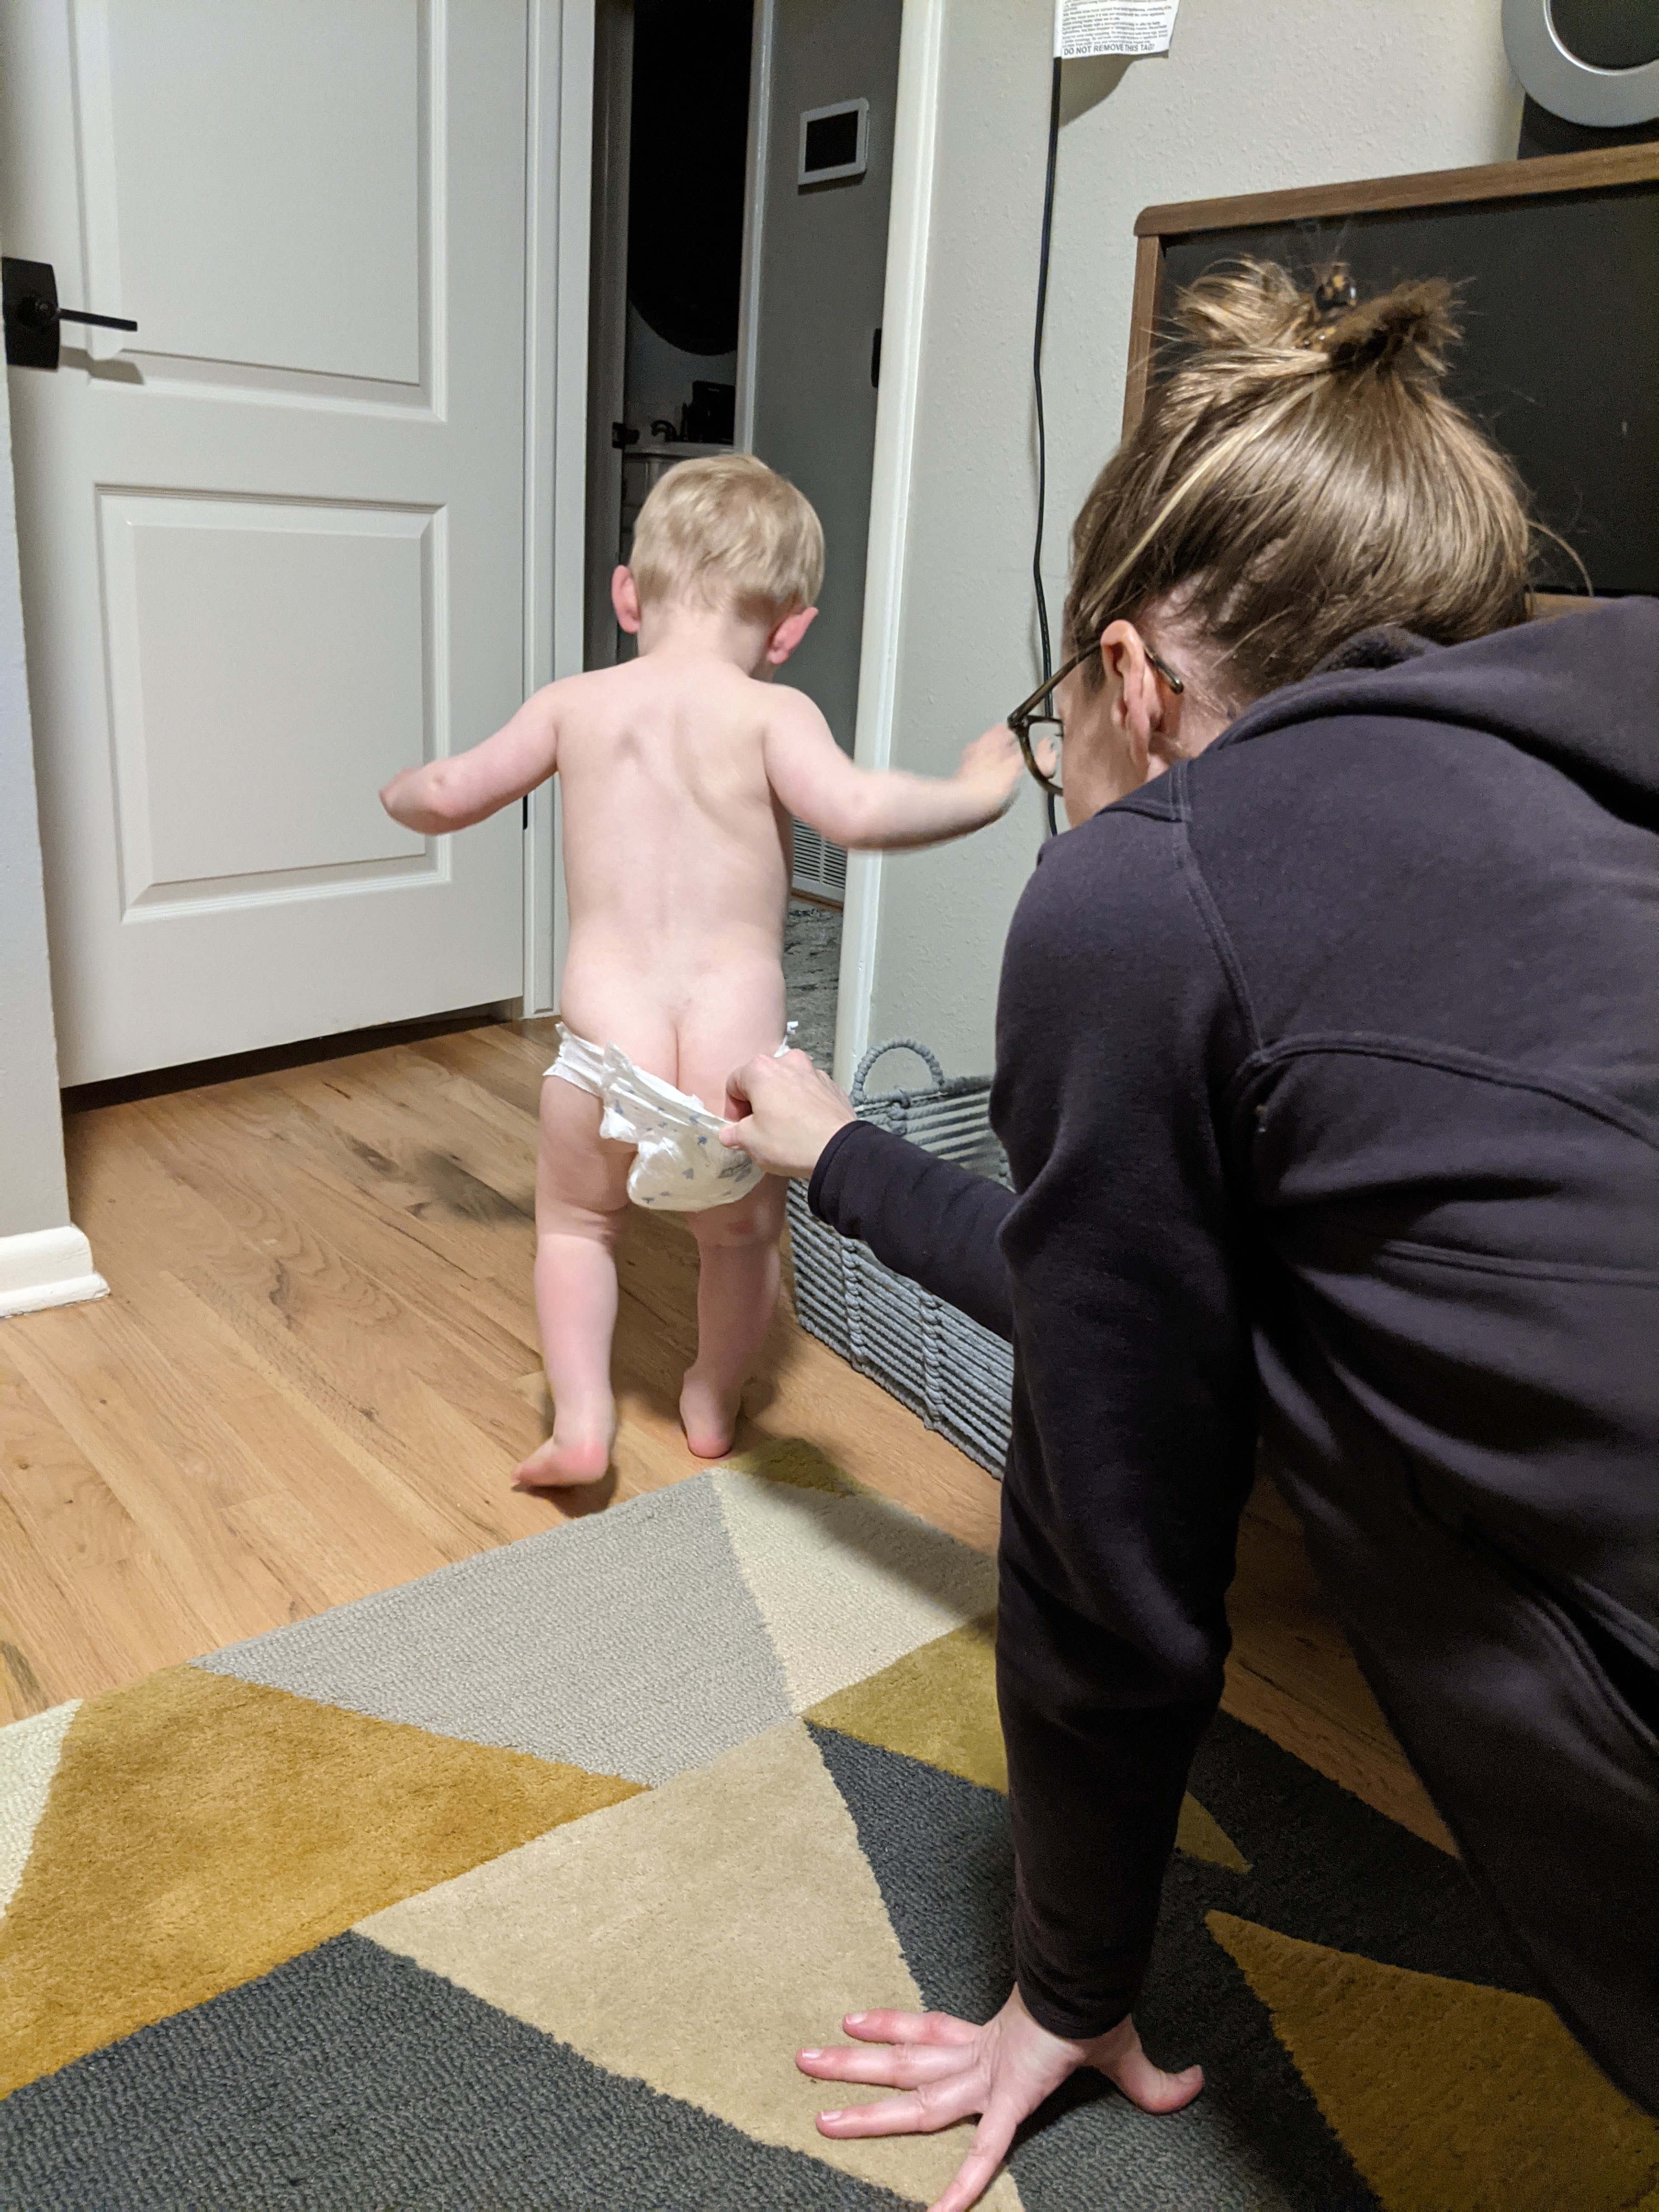 Owen making a break for it with his mom snatching him by the diaper.